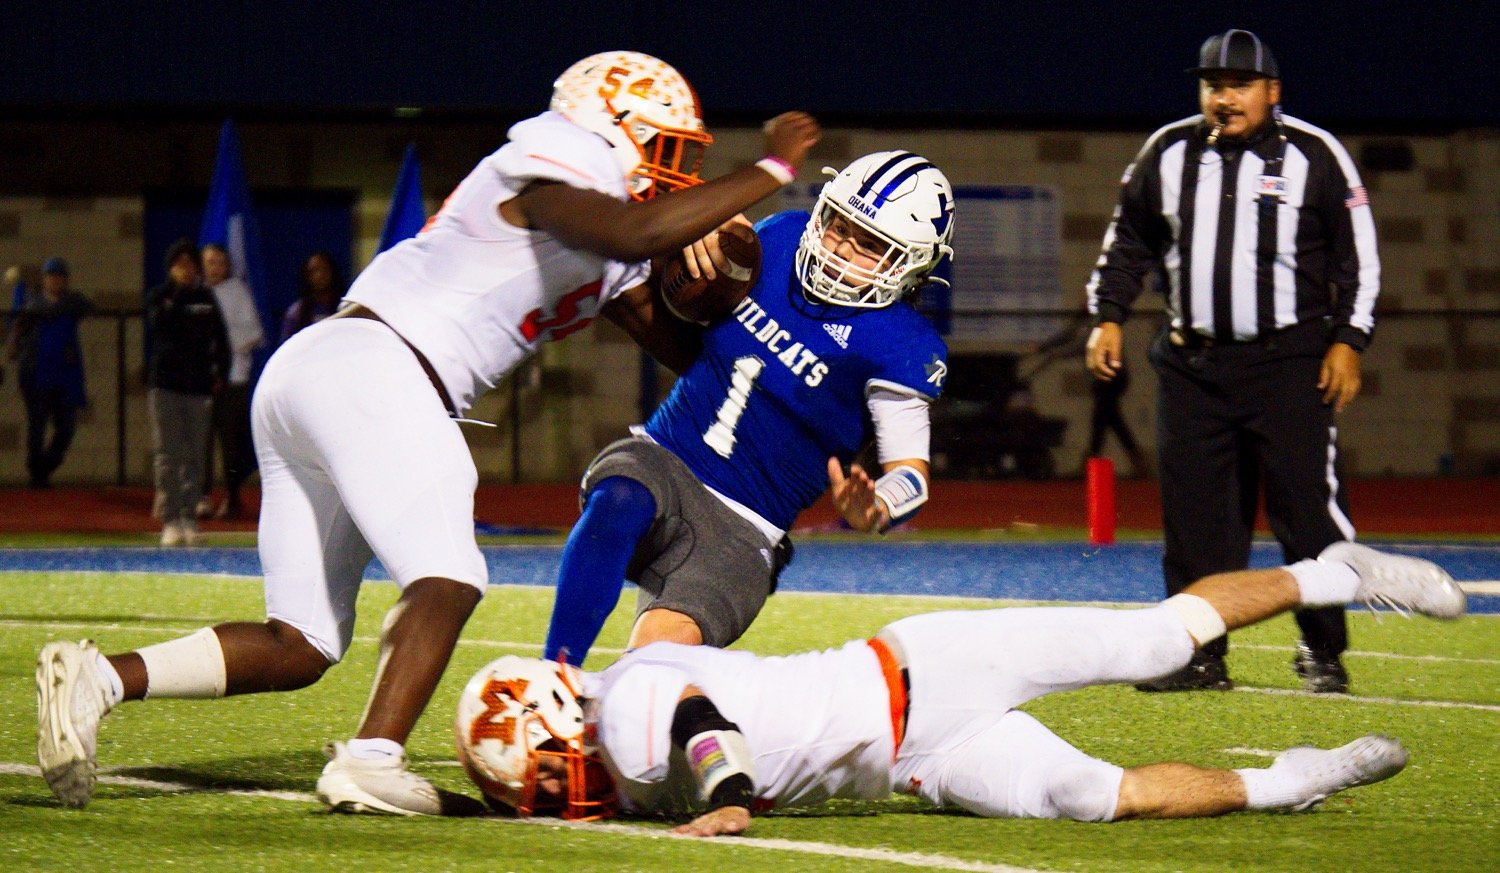 D.J. Newsome (54) and Coy Anderson sack the Wildcat quarterback for a loss in the fourth quarter. [See more of how Mineola reigned supreme.]